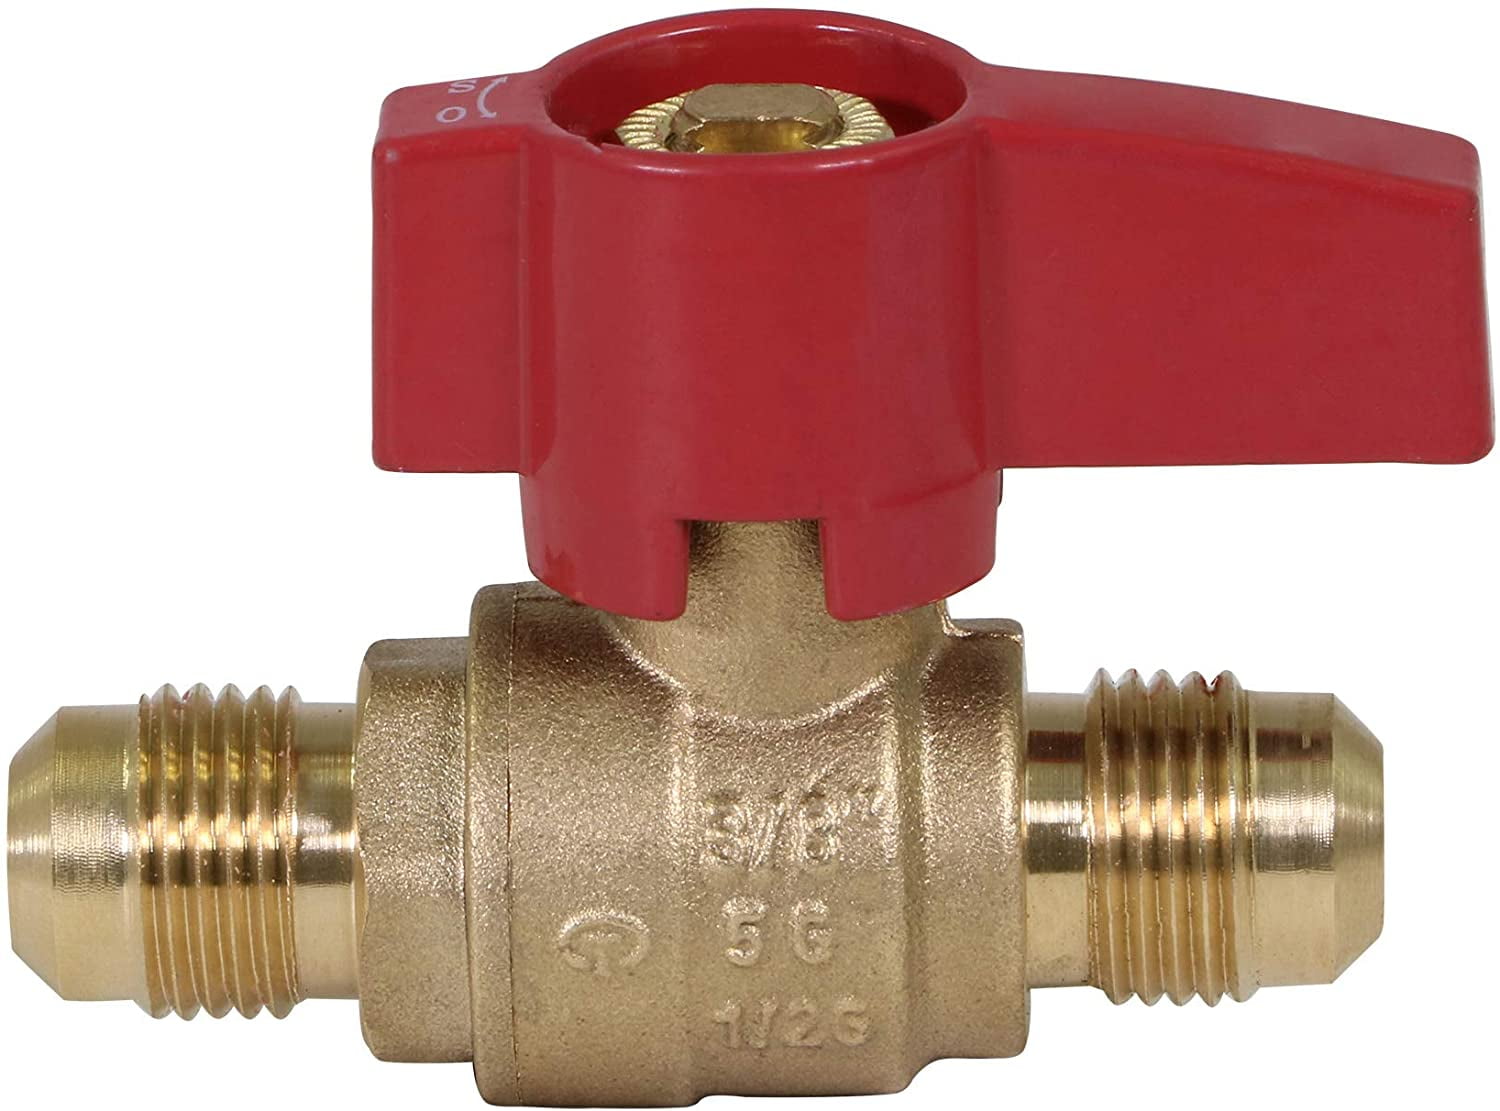 Propane Natural Gas Cut Off Valve 3/8 Flare x 3/8 Flare 